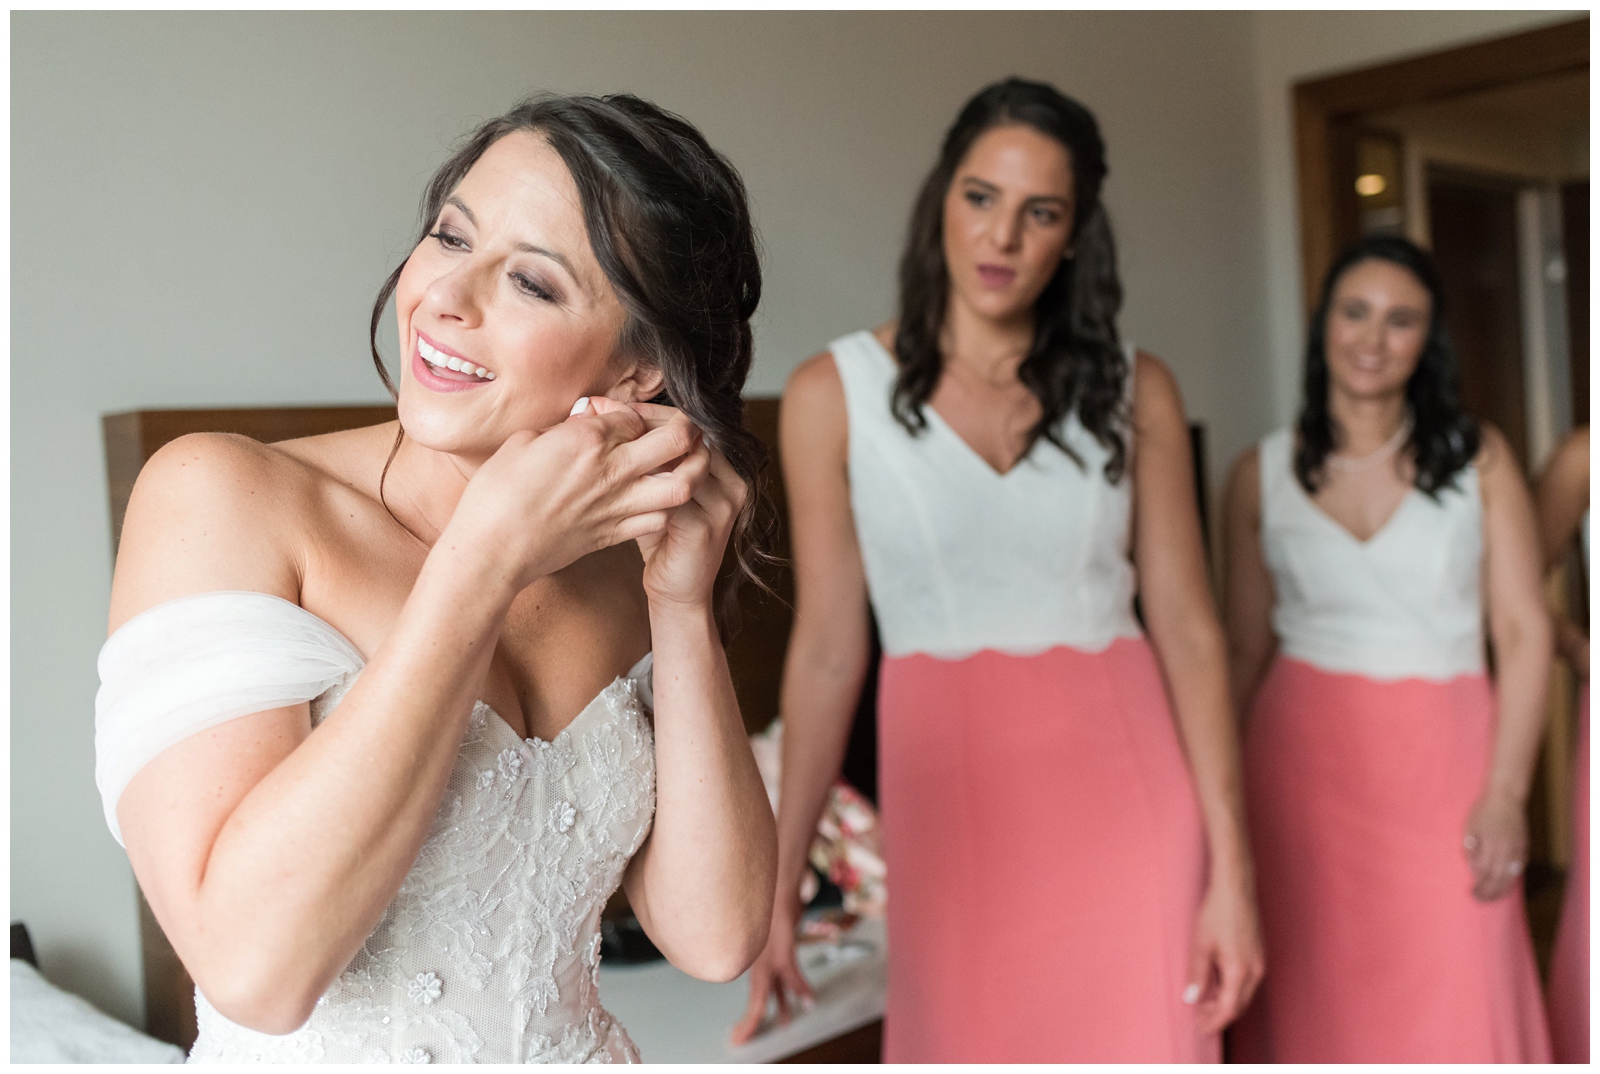 bride puts on earrings for wedding day in Columbus OH while bridesmaids in coral and white gowns watch